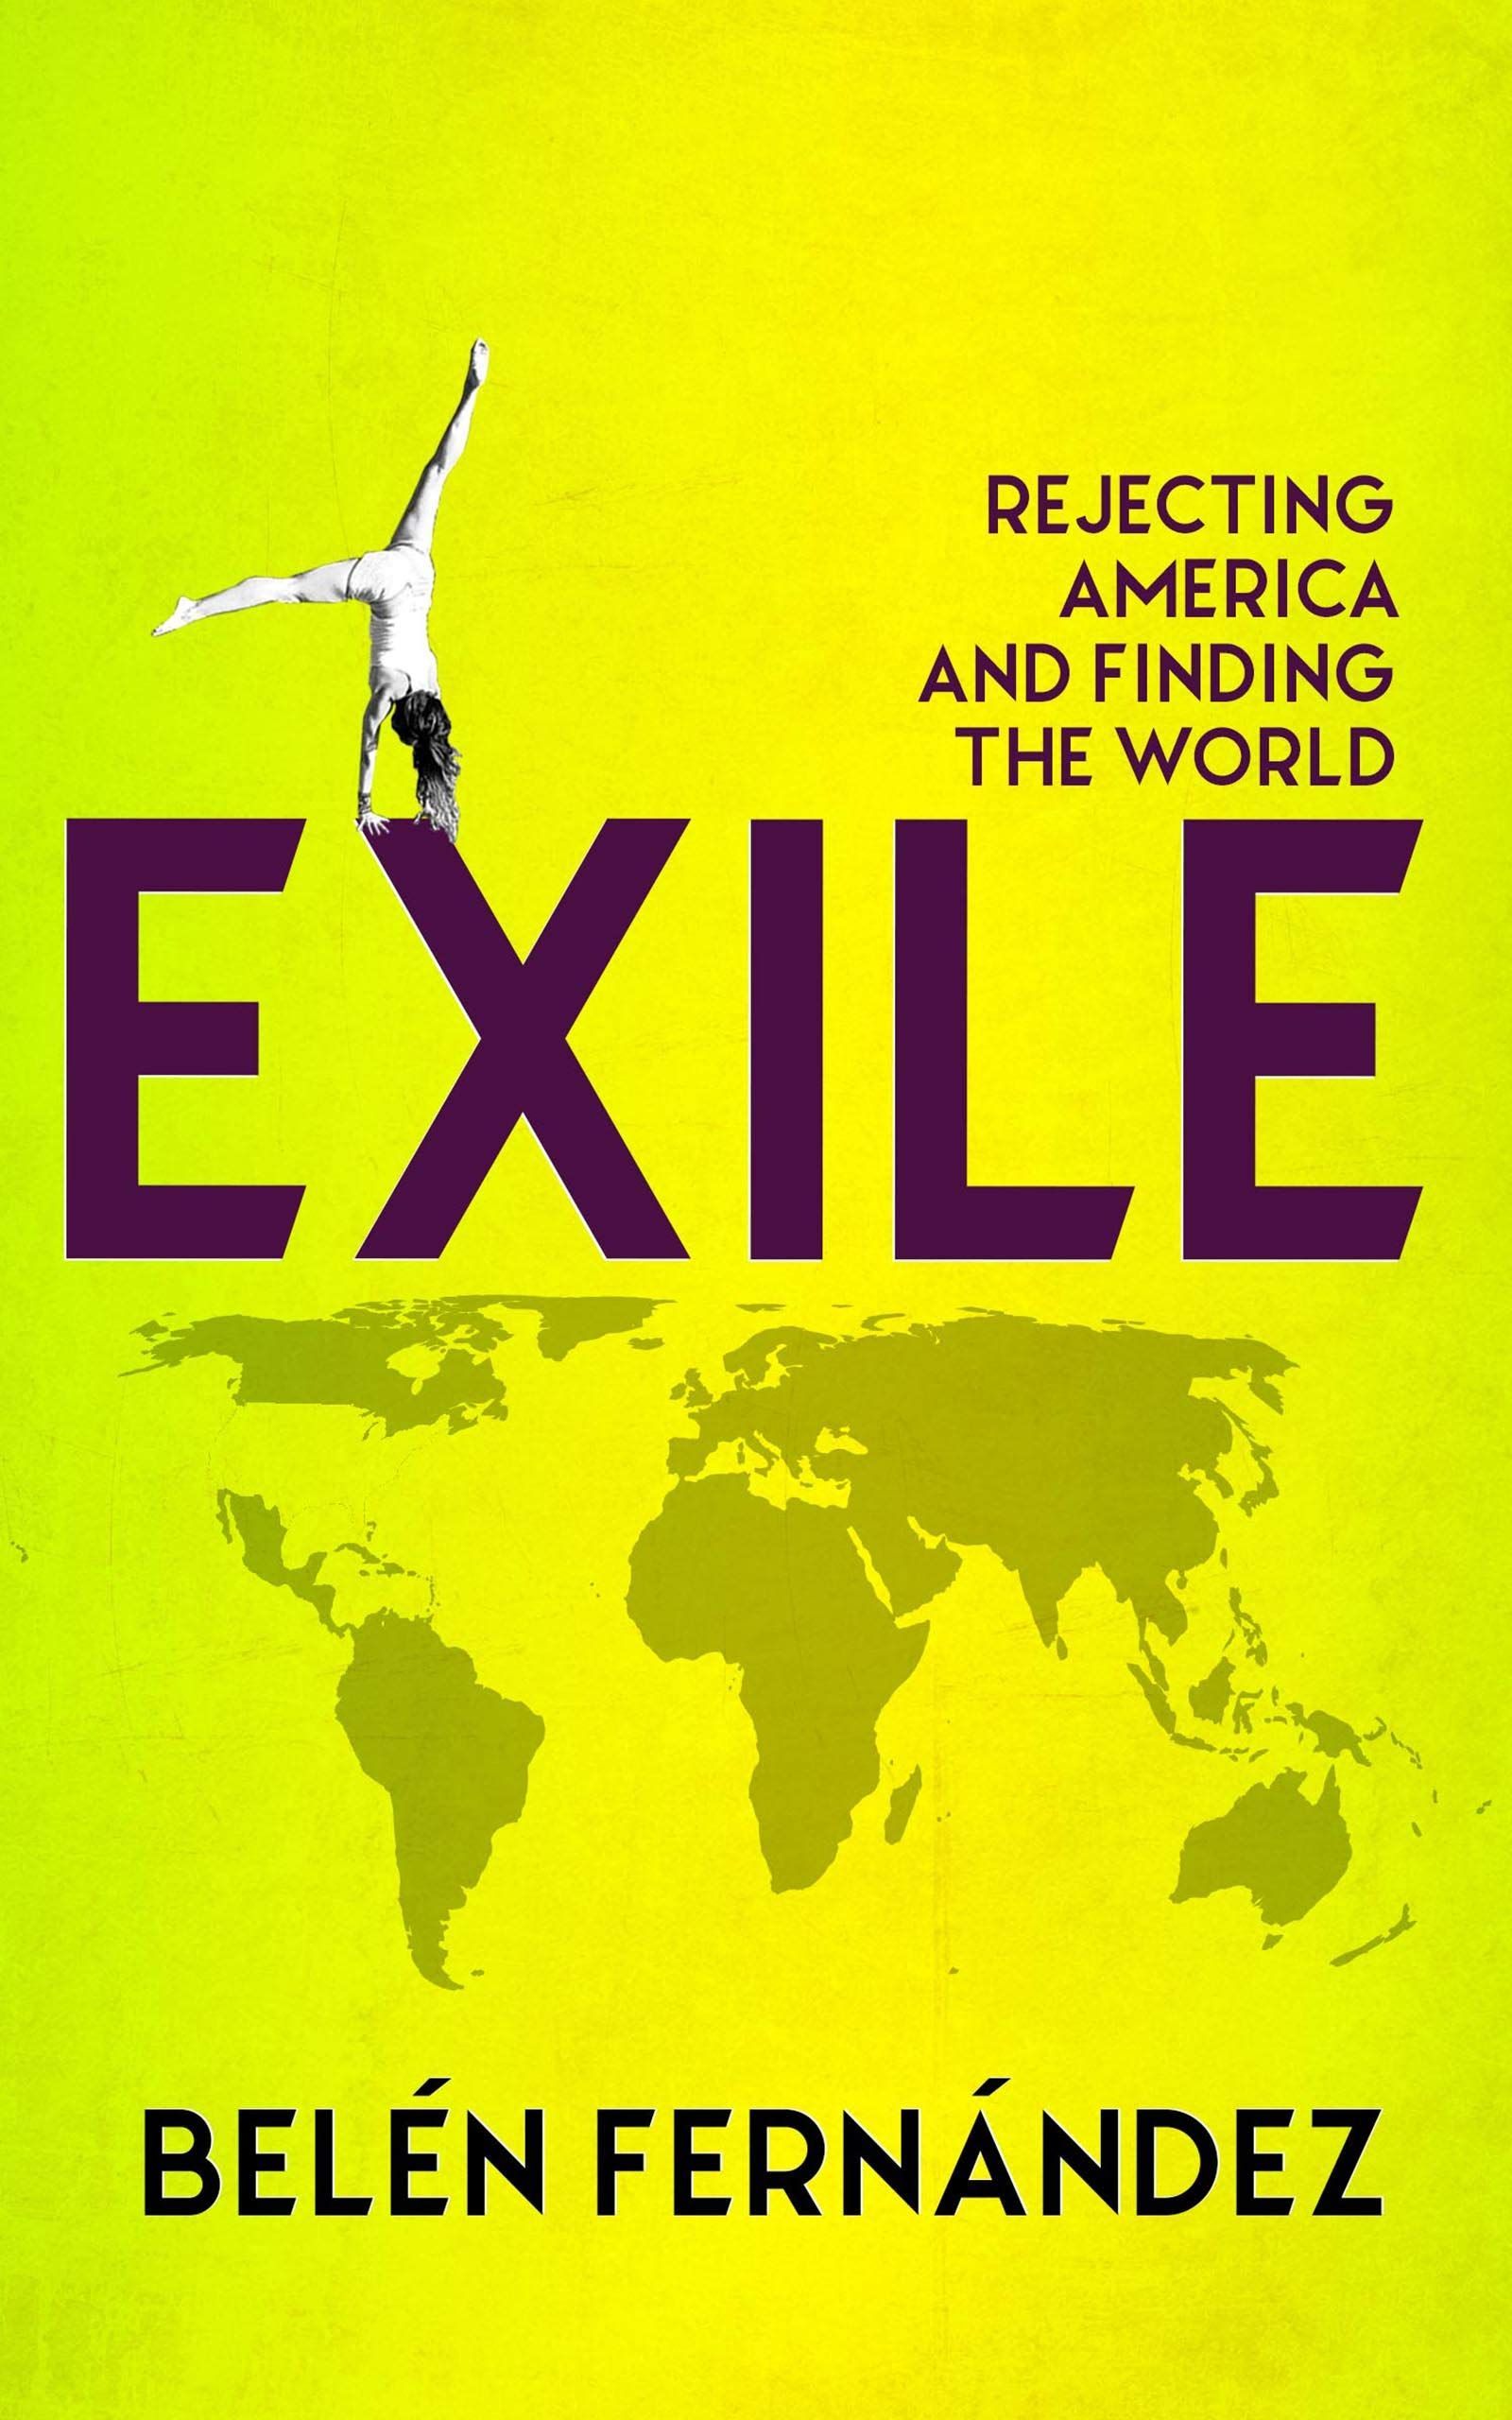 A Personal Journey: On “Exile: Rejecting America and Finding the World”